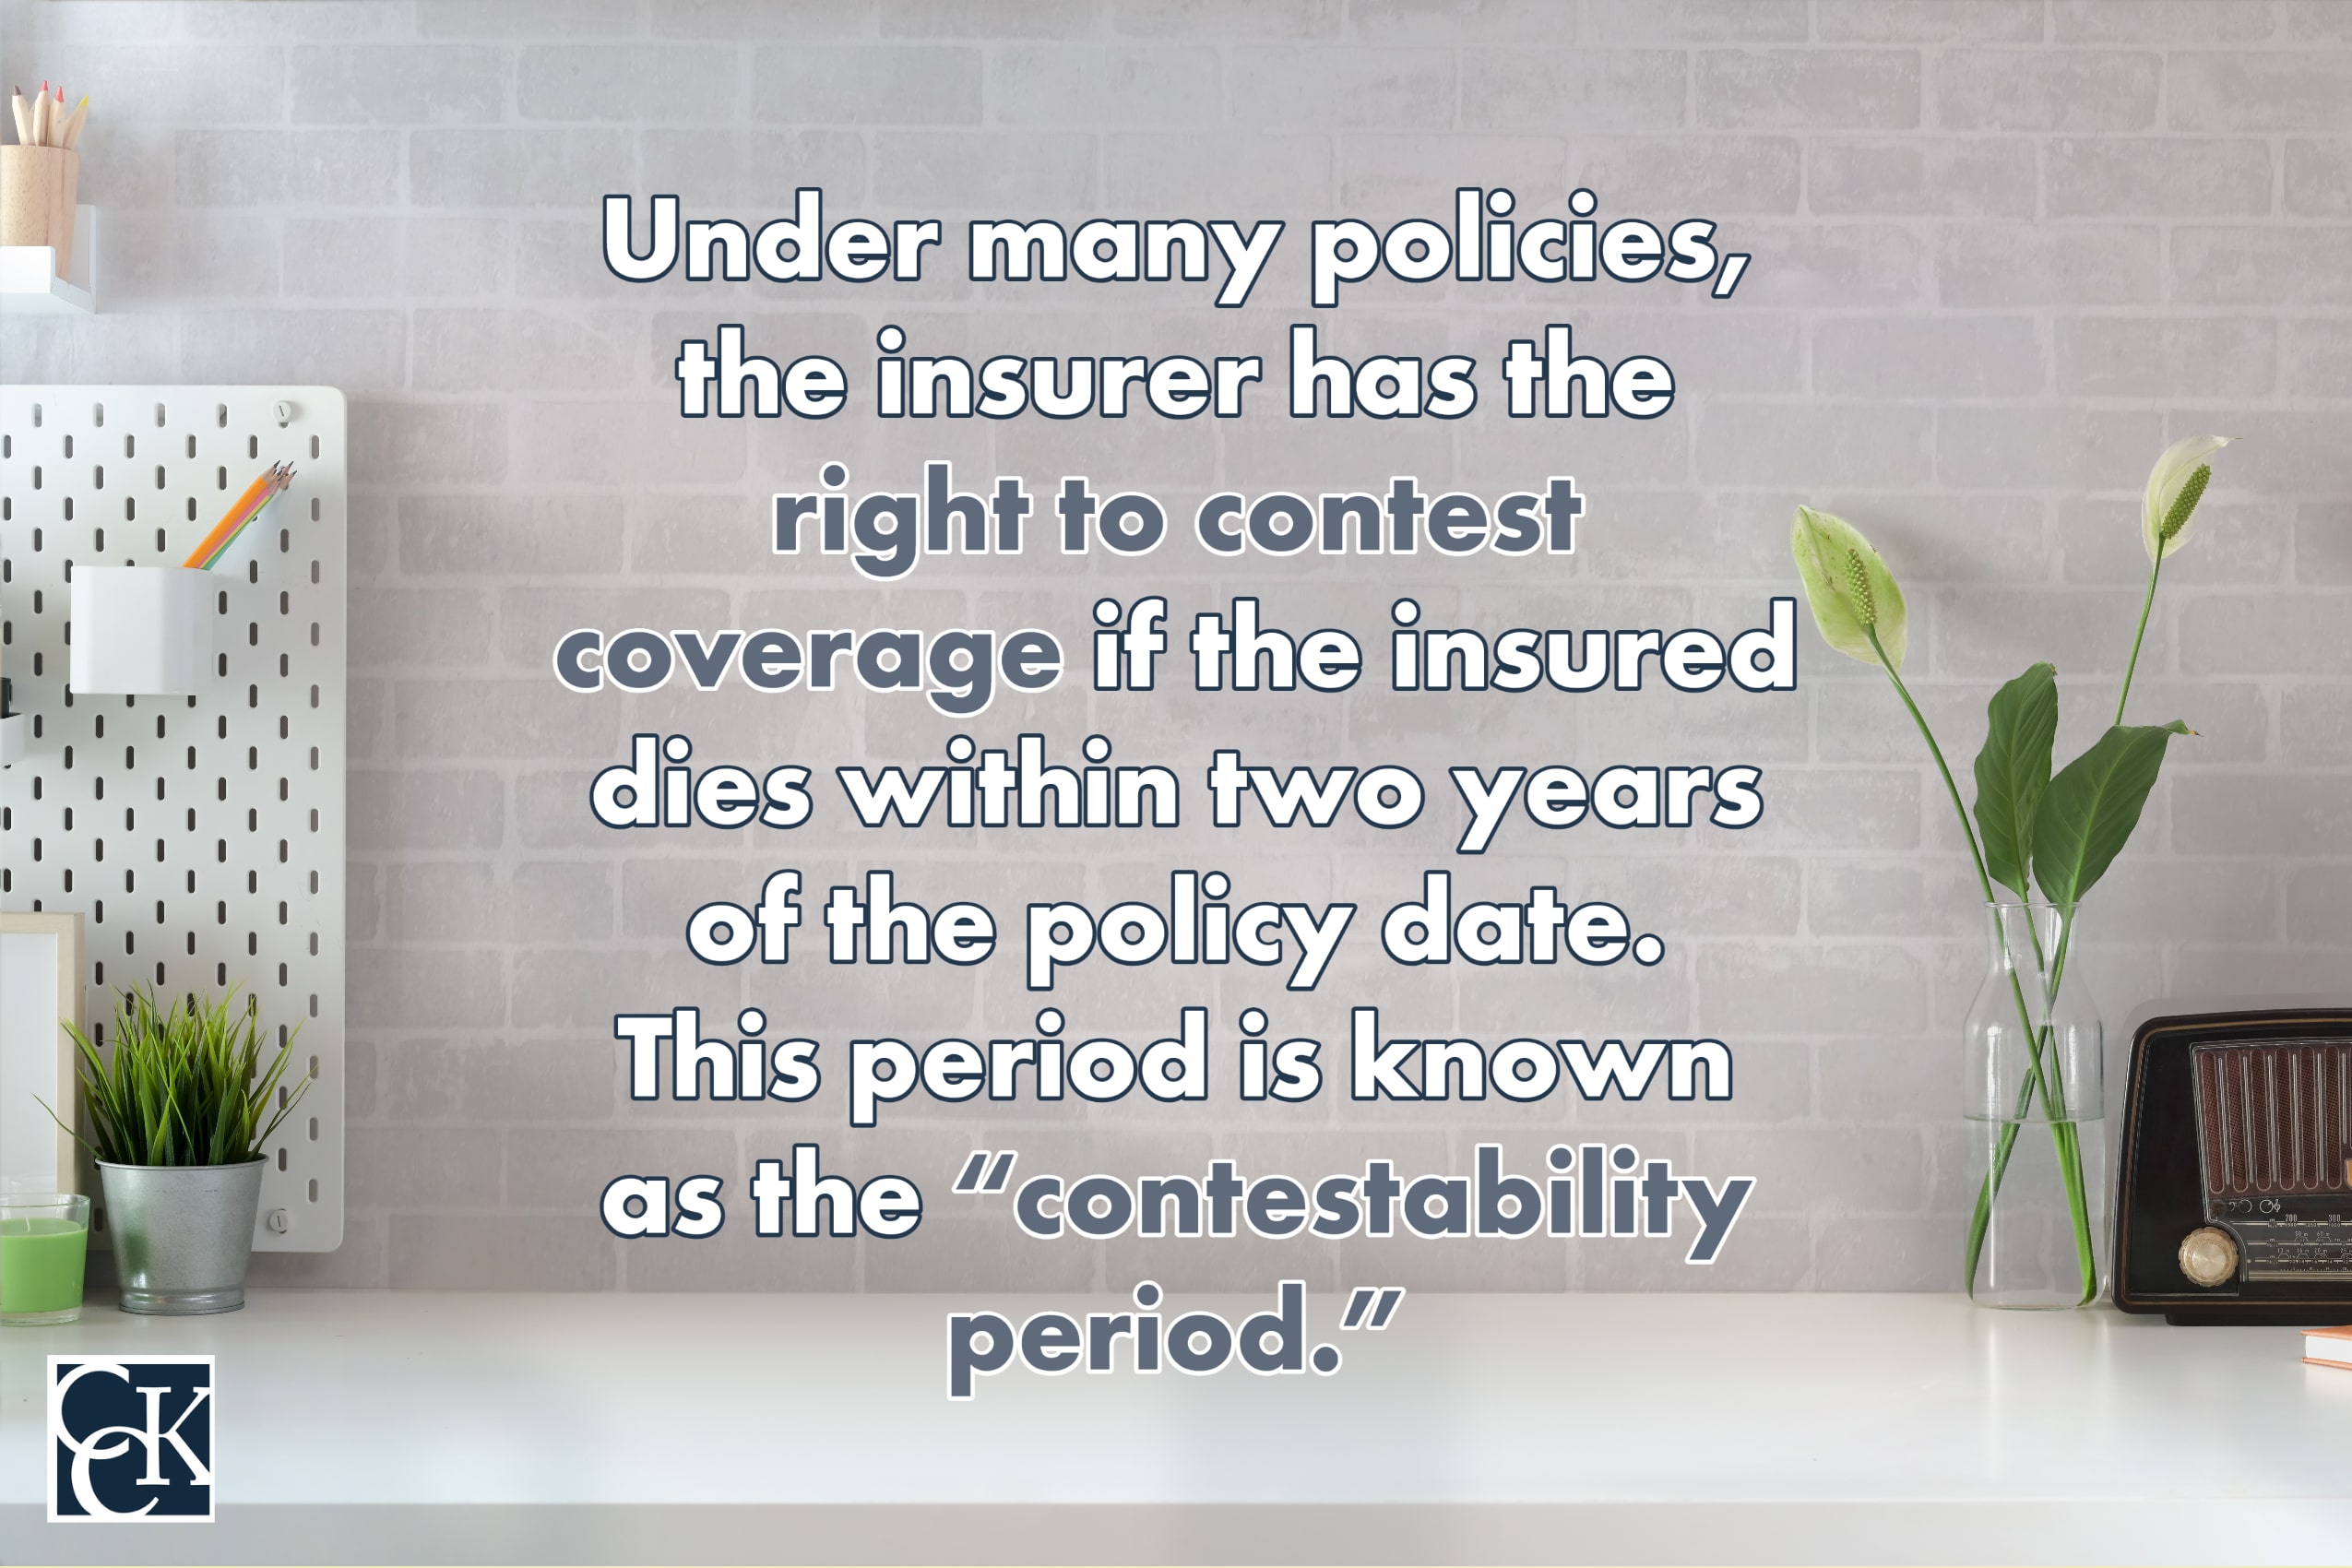 Under many policies, the insurer has the right to contest coverage if the insured dies within two years of the policy date. This period is known as the "contestability period."